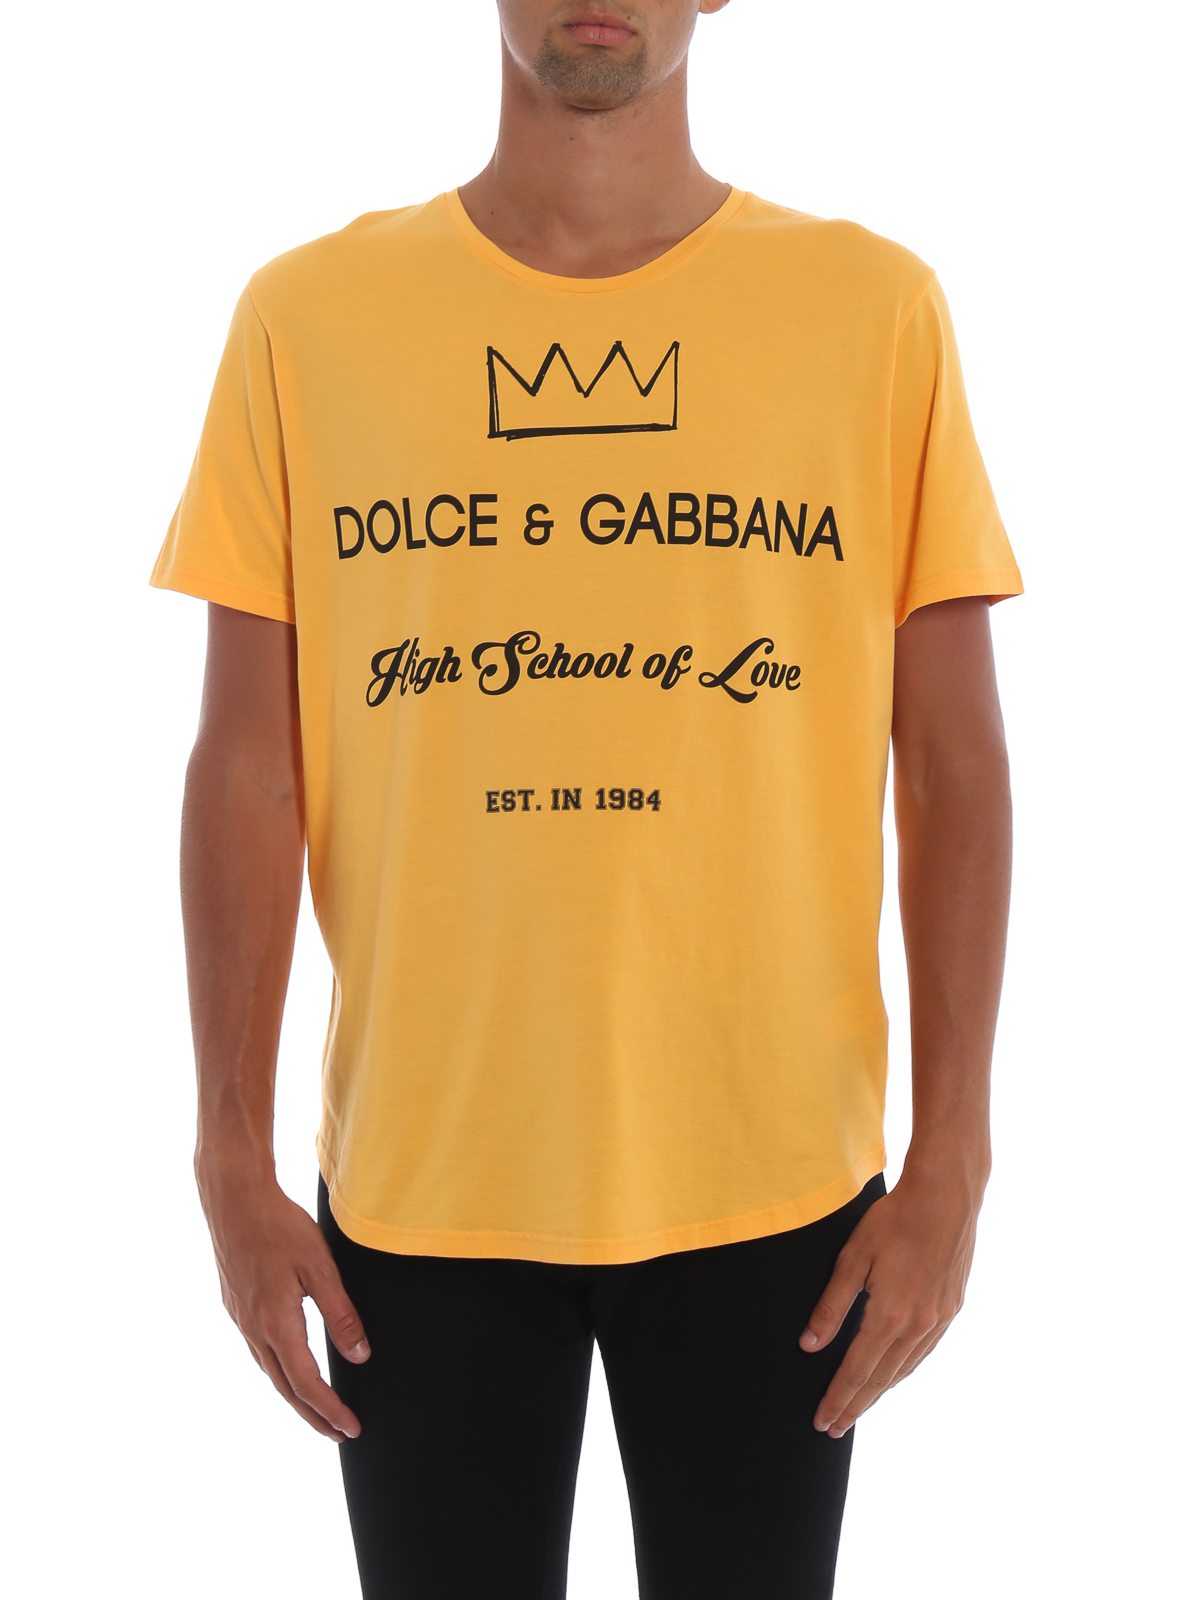 dolce and gabbana clothes